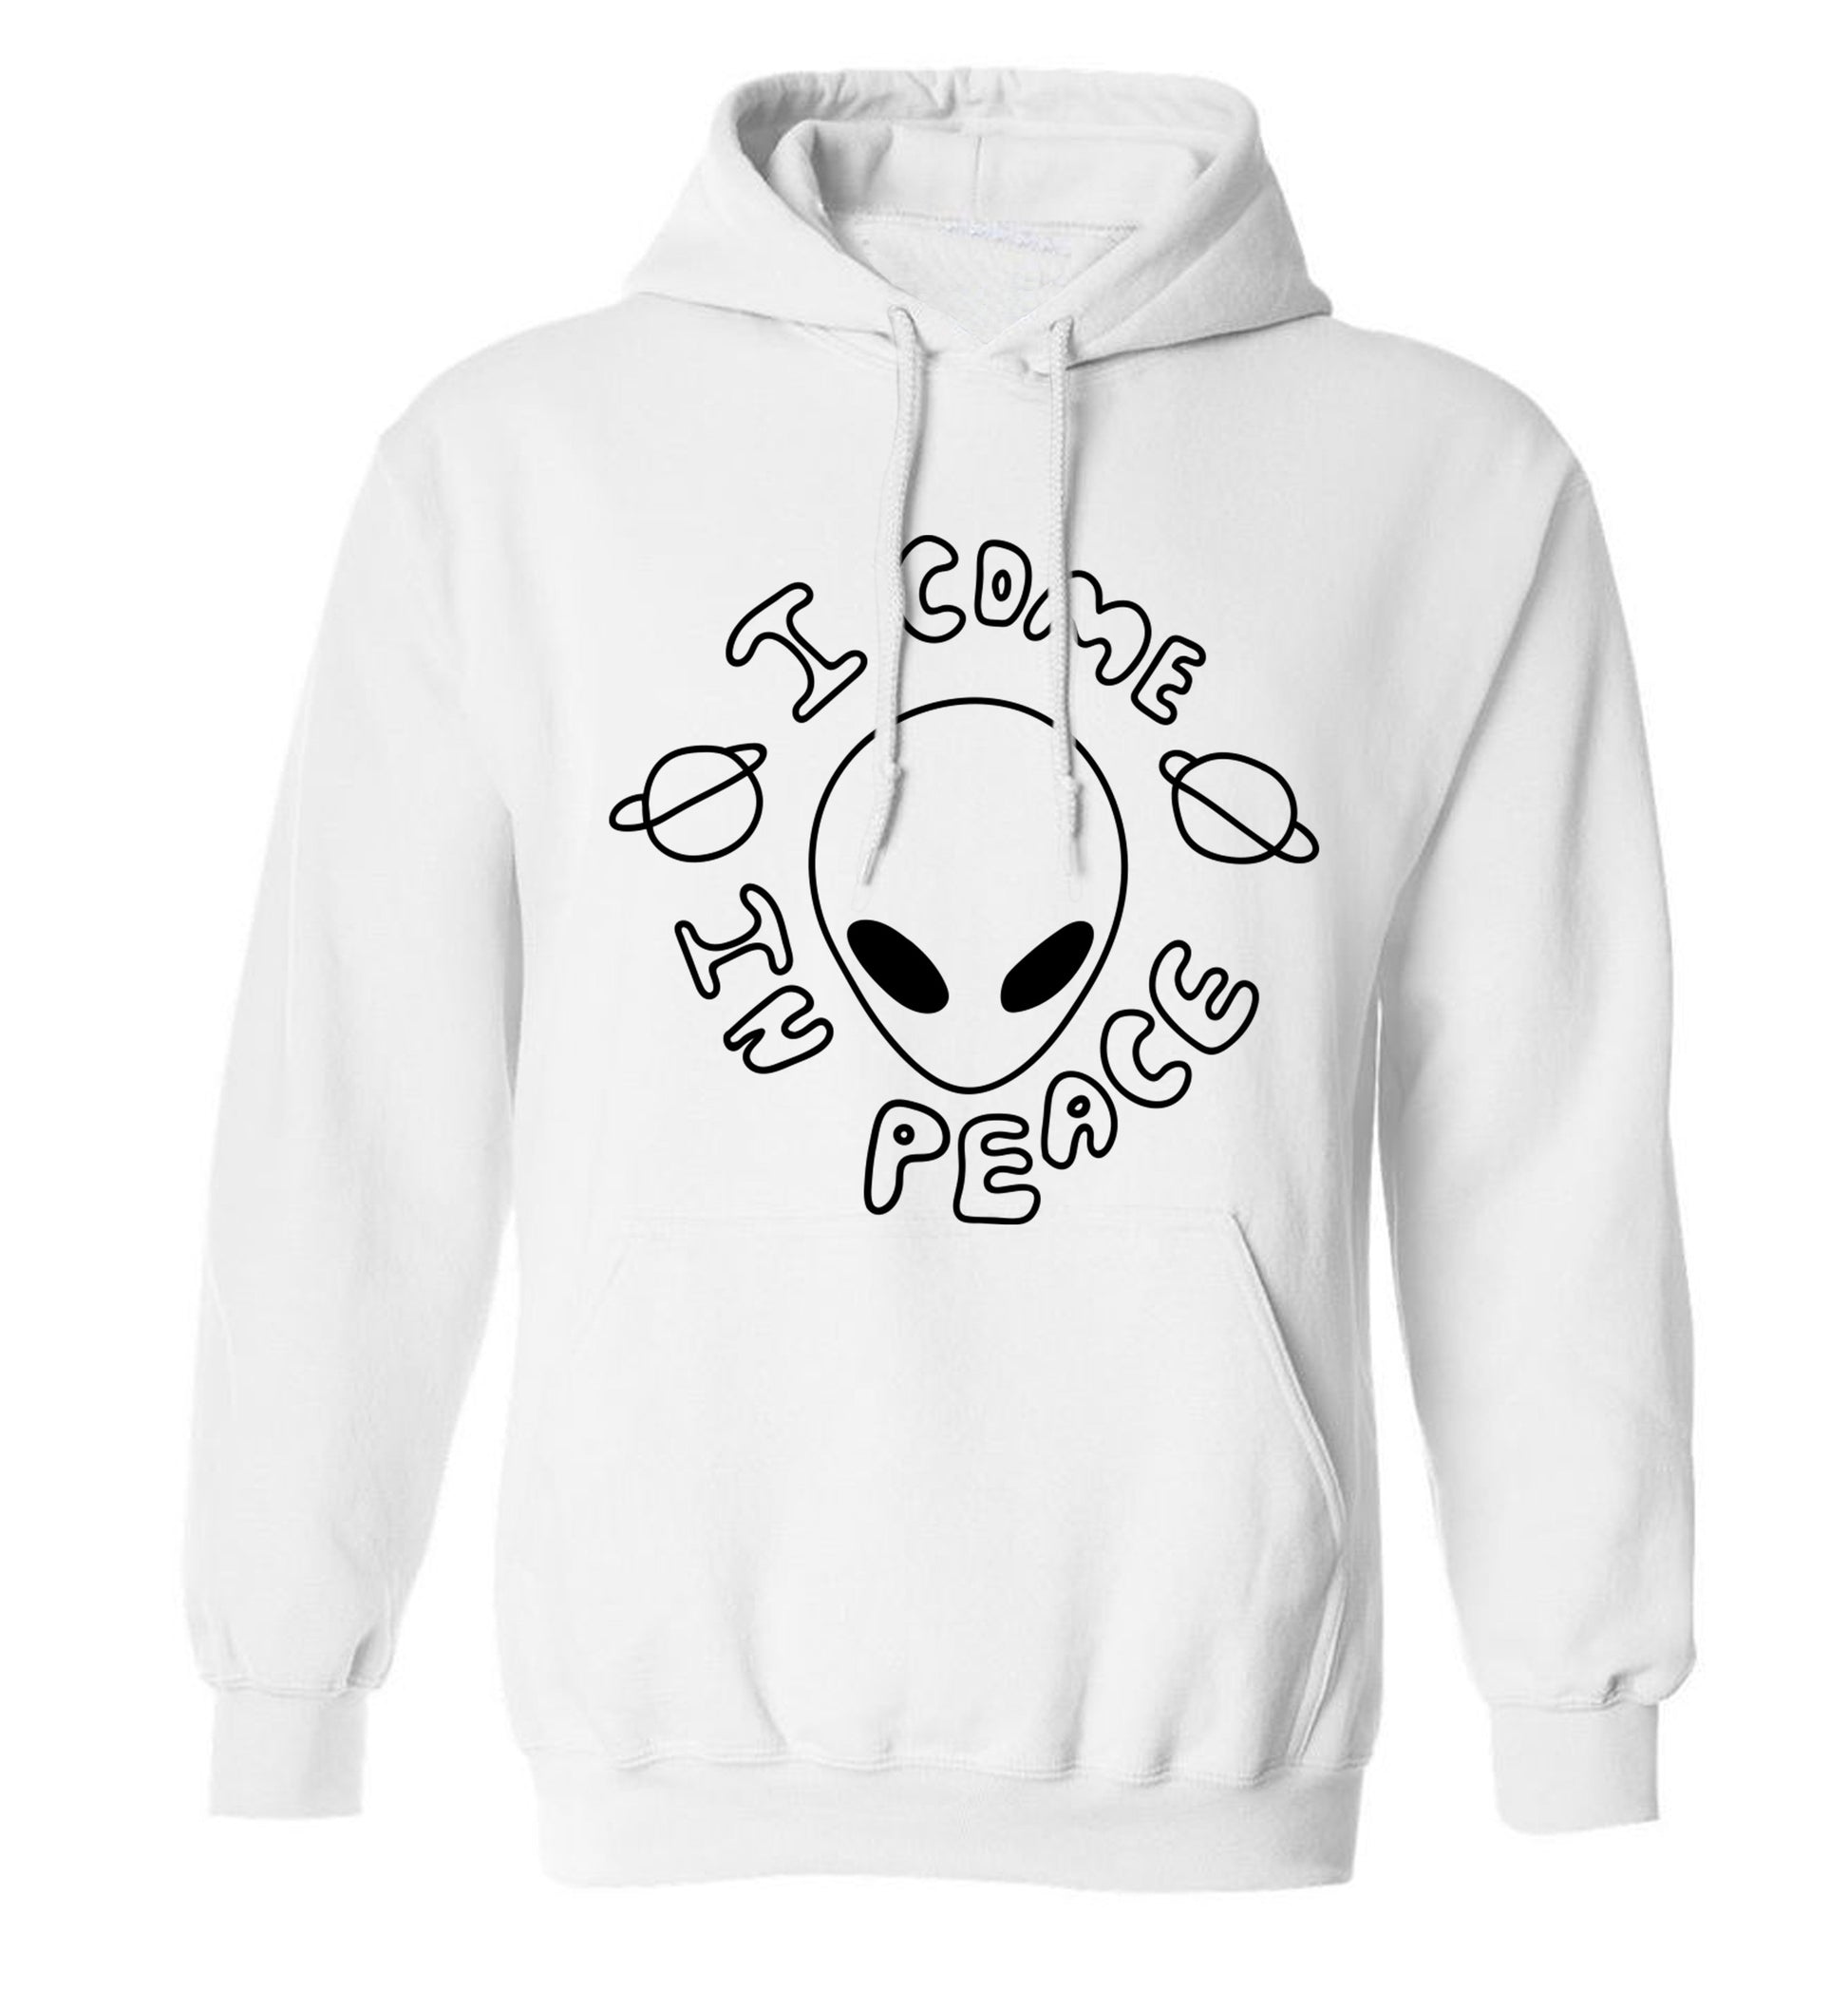 I come in peace adults unisex white hoodie 2XL